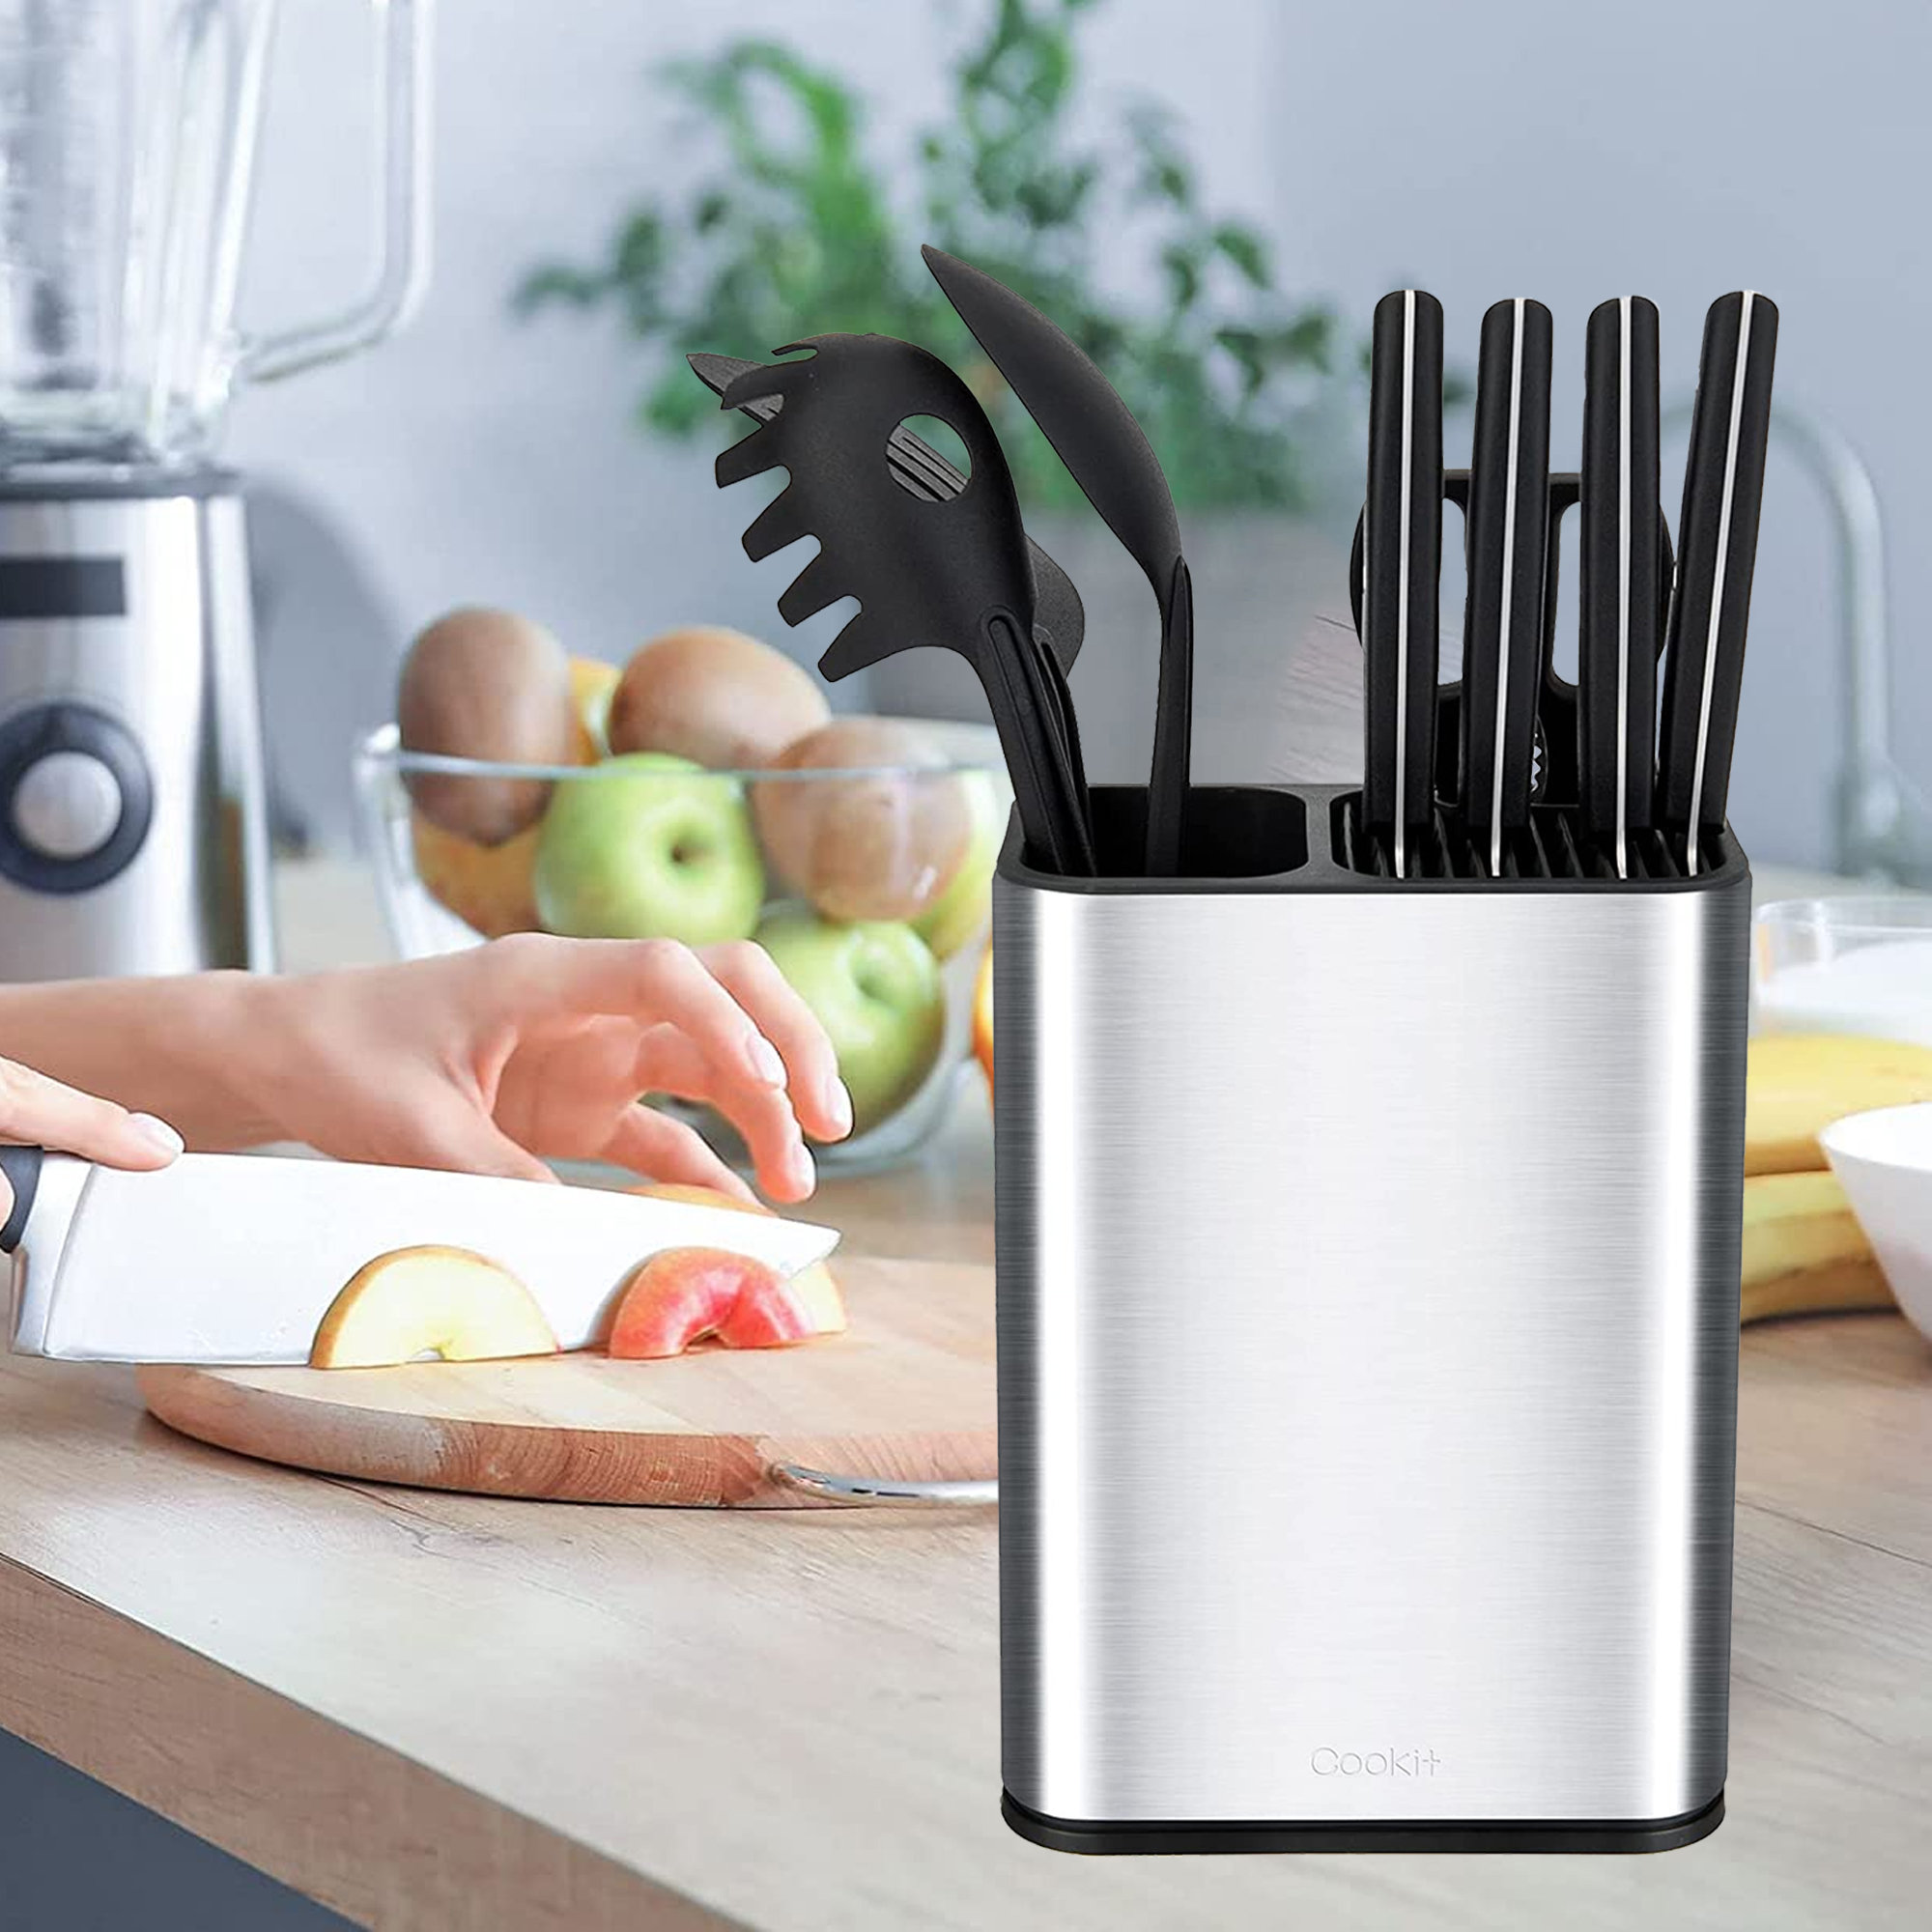  Knife Block Without Knives, Cookit Universal Round